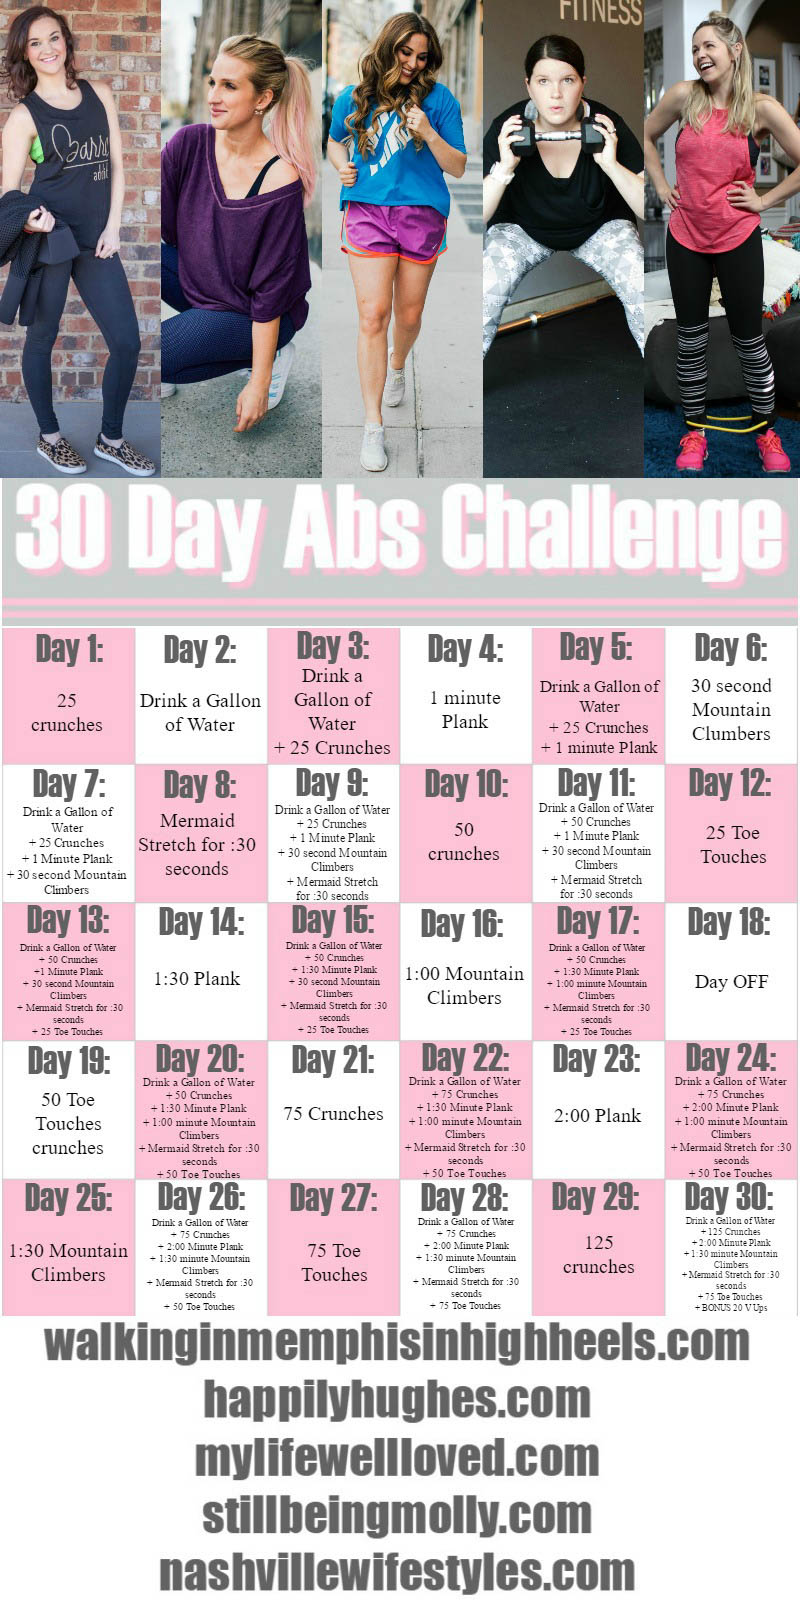 30 Day Ab Challenge Workout with CVS by fitness blogger Jessica of Happily Hughes